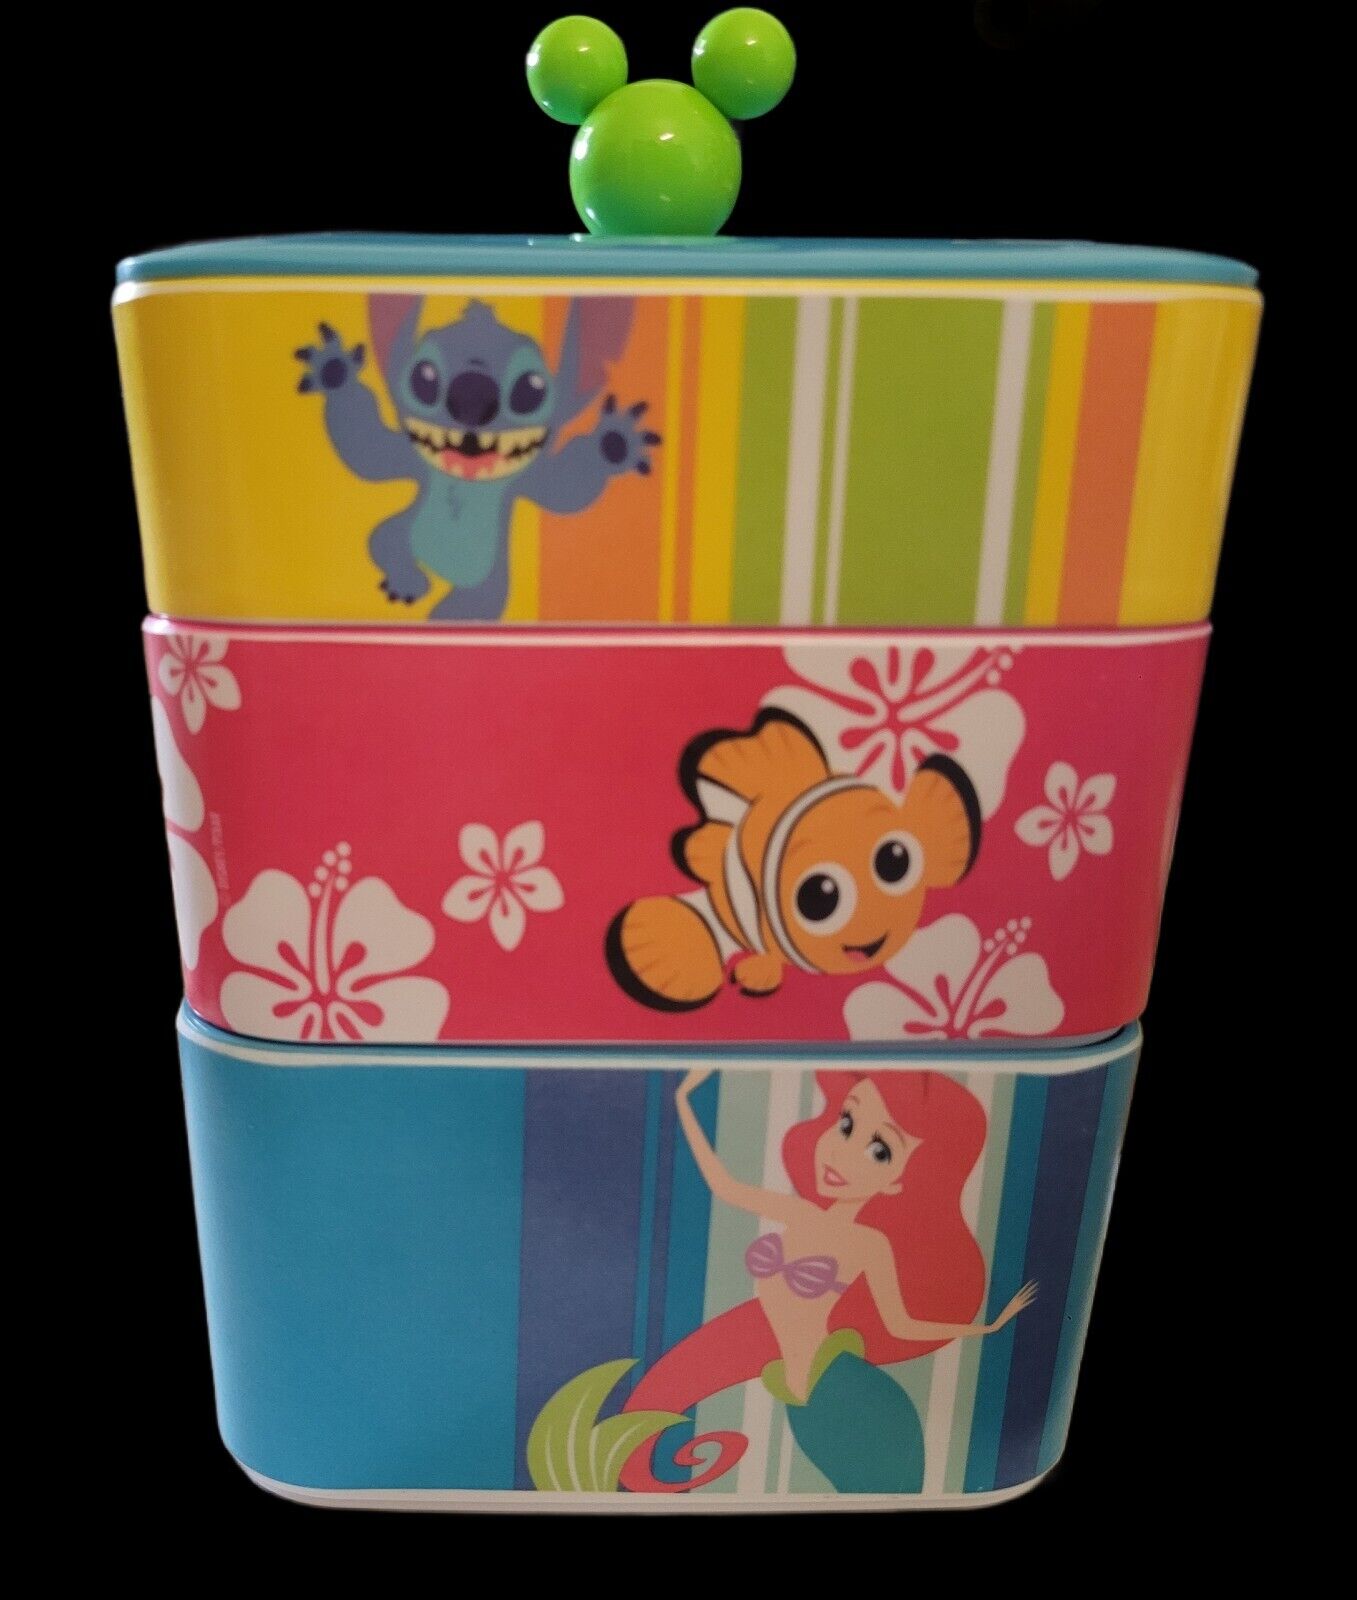 Disney Store summer fun acrylic square stacking containers with lid - great cond